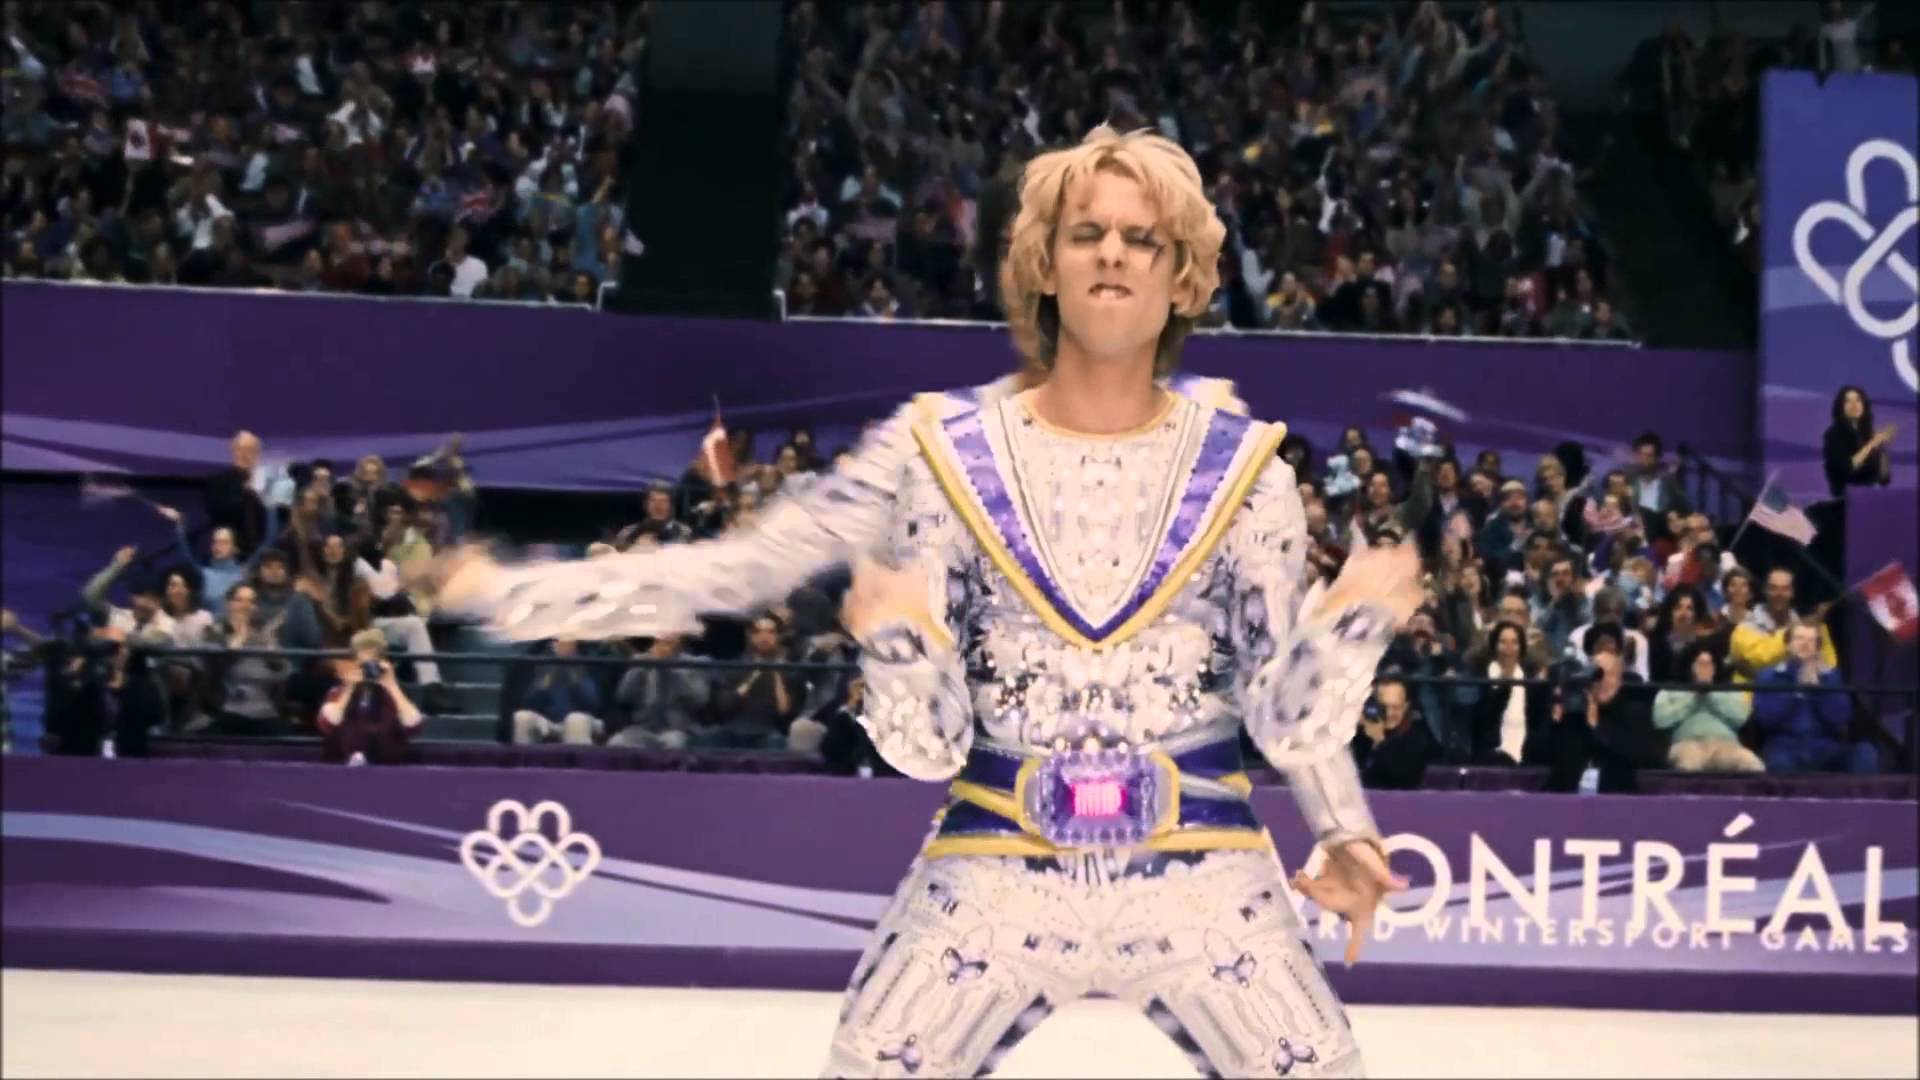 blades of glory full movie download